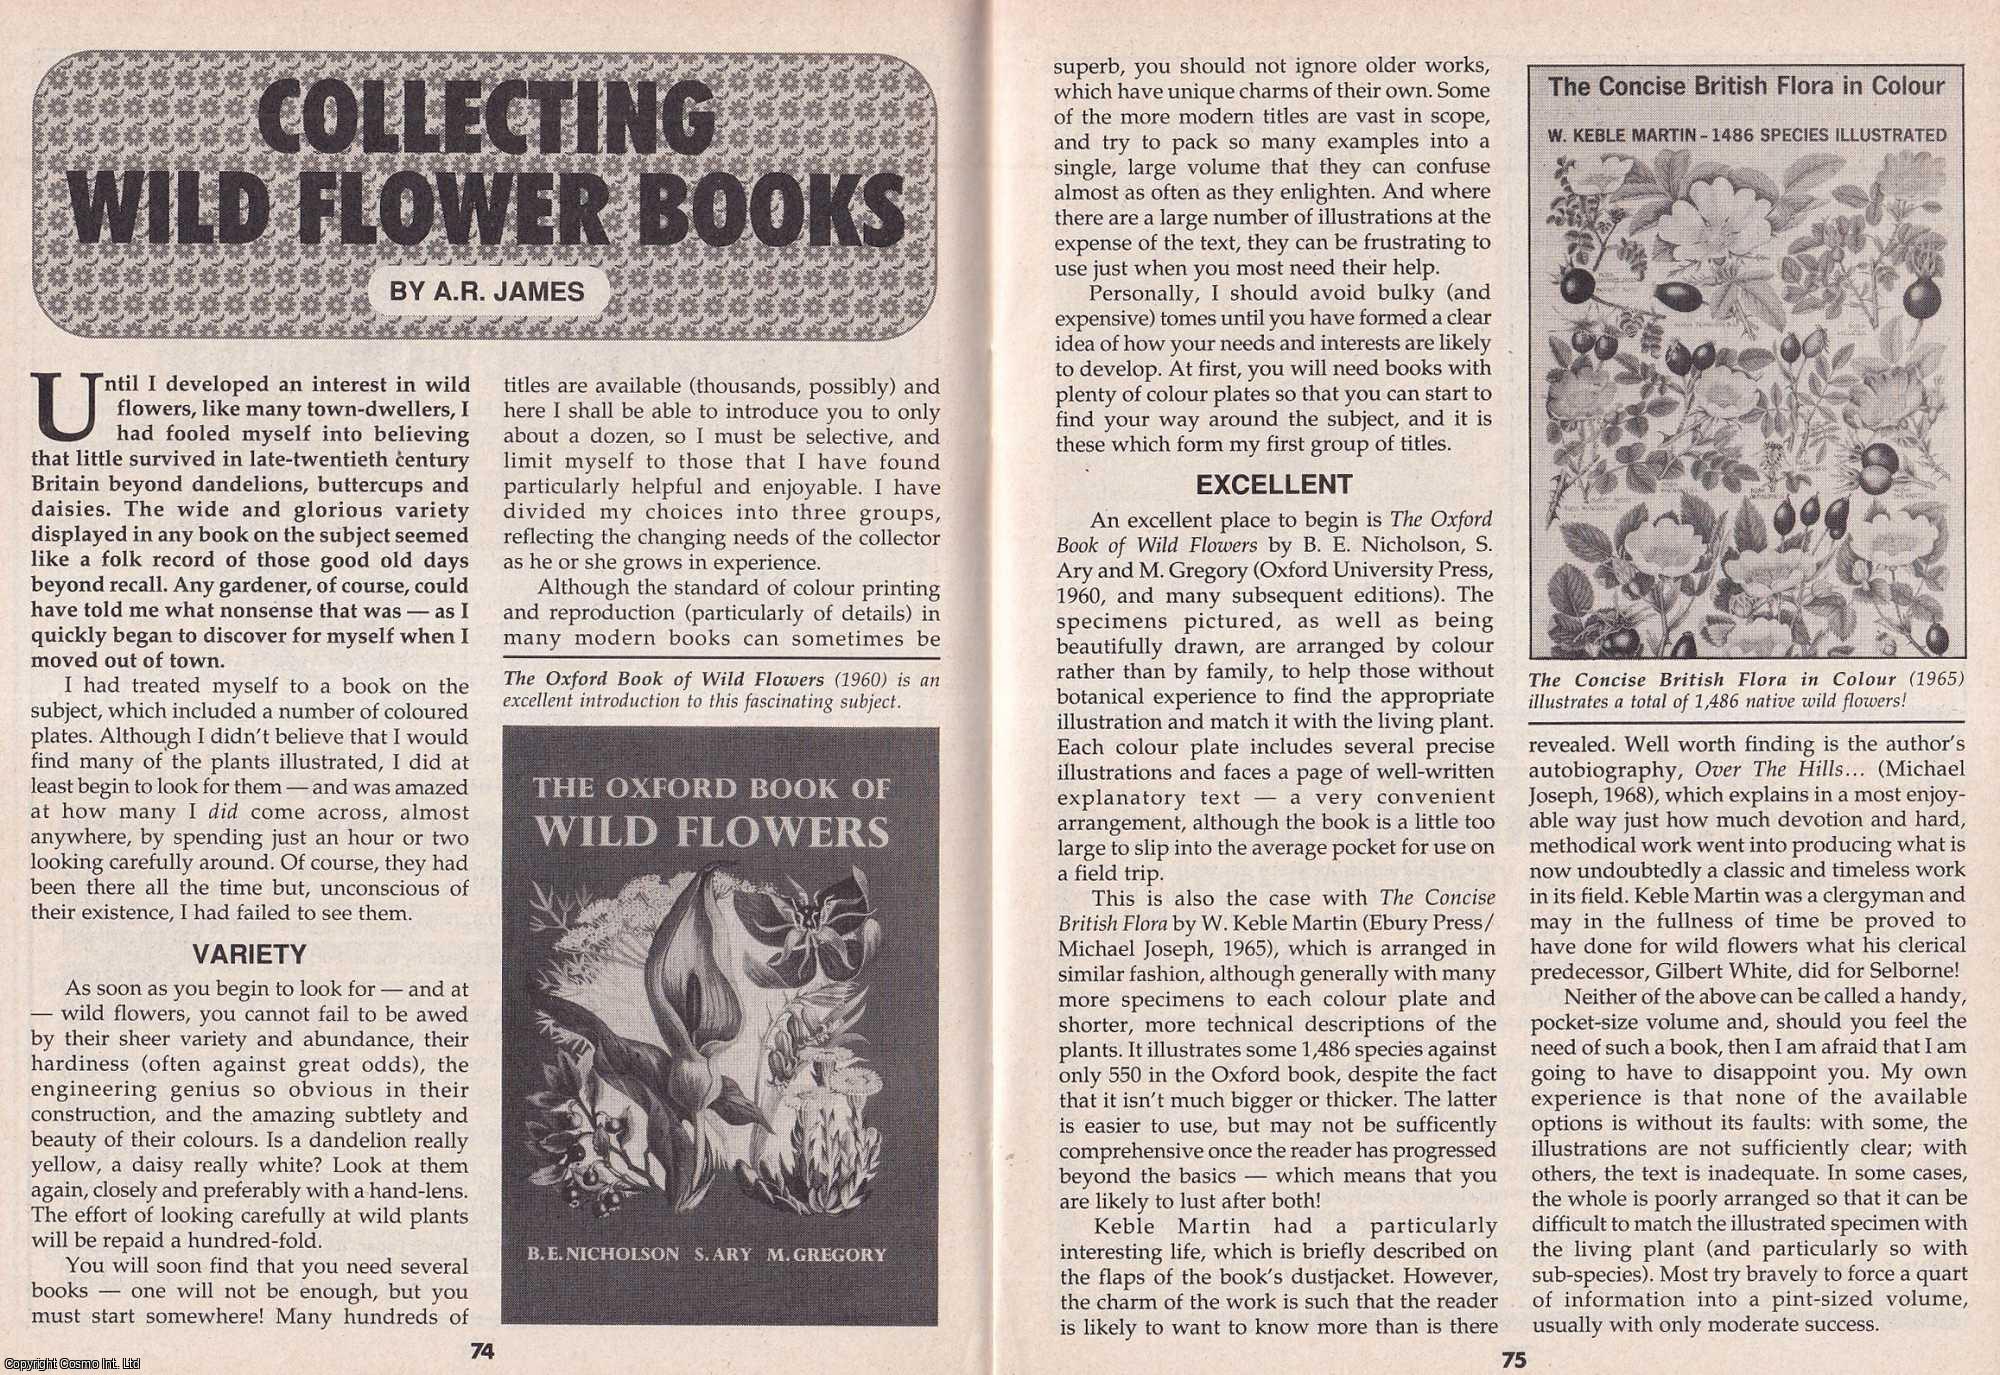 A. R. James - Collecting Wild Flower Books. This is an original article separated from an issue of The Book & Magazine Collector publication.